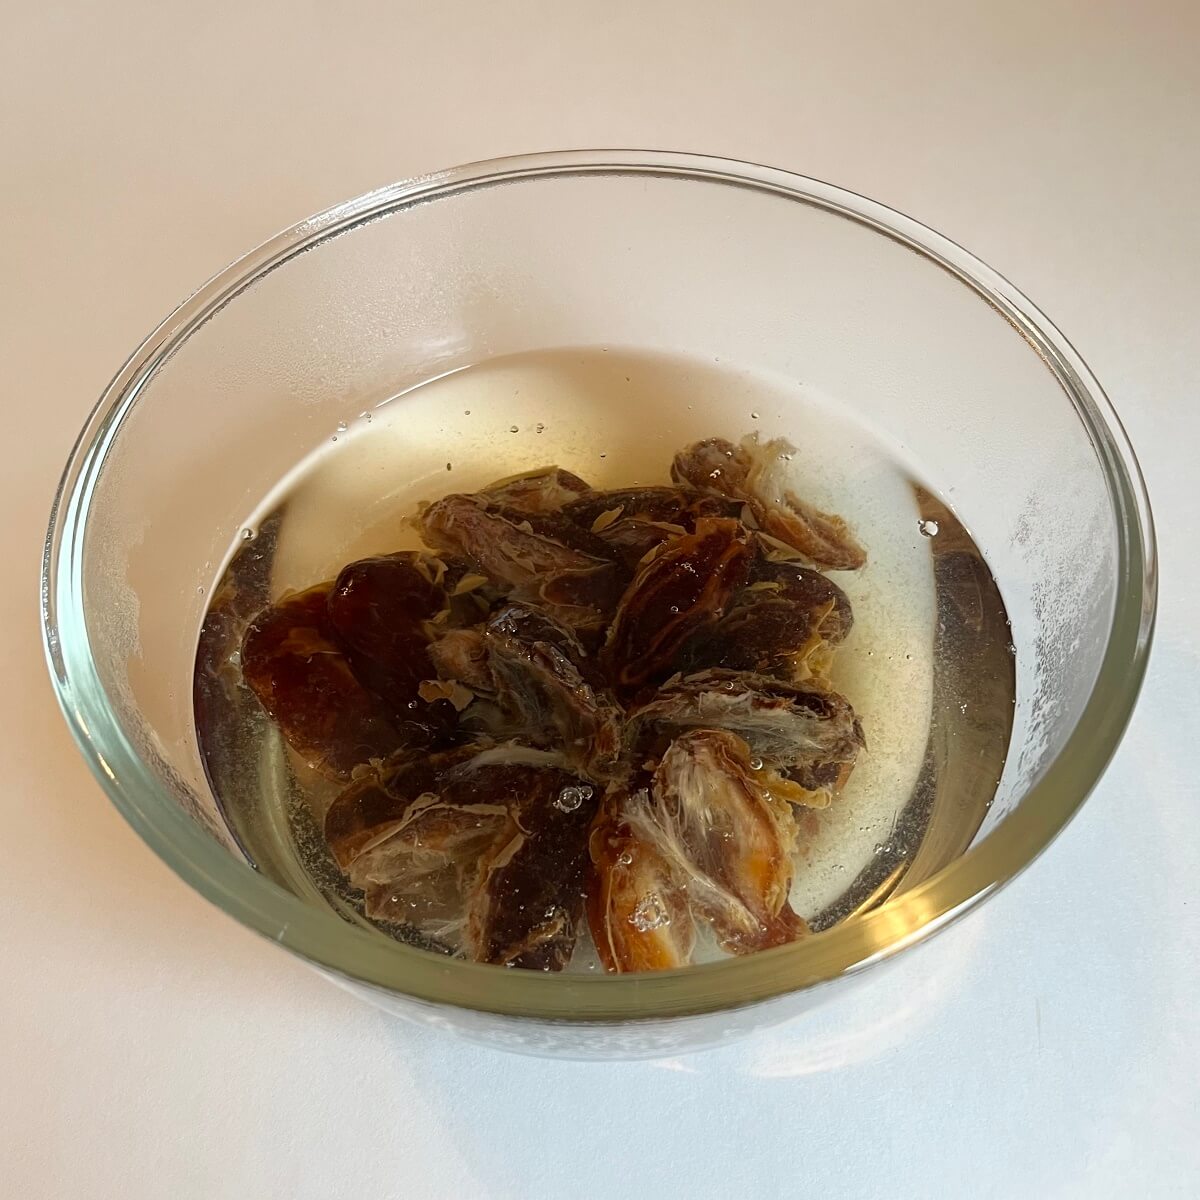 Dates being soaked in boiling water in a glass bowl.